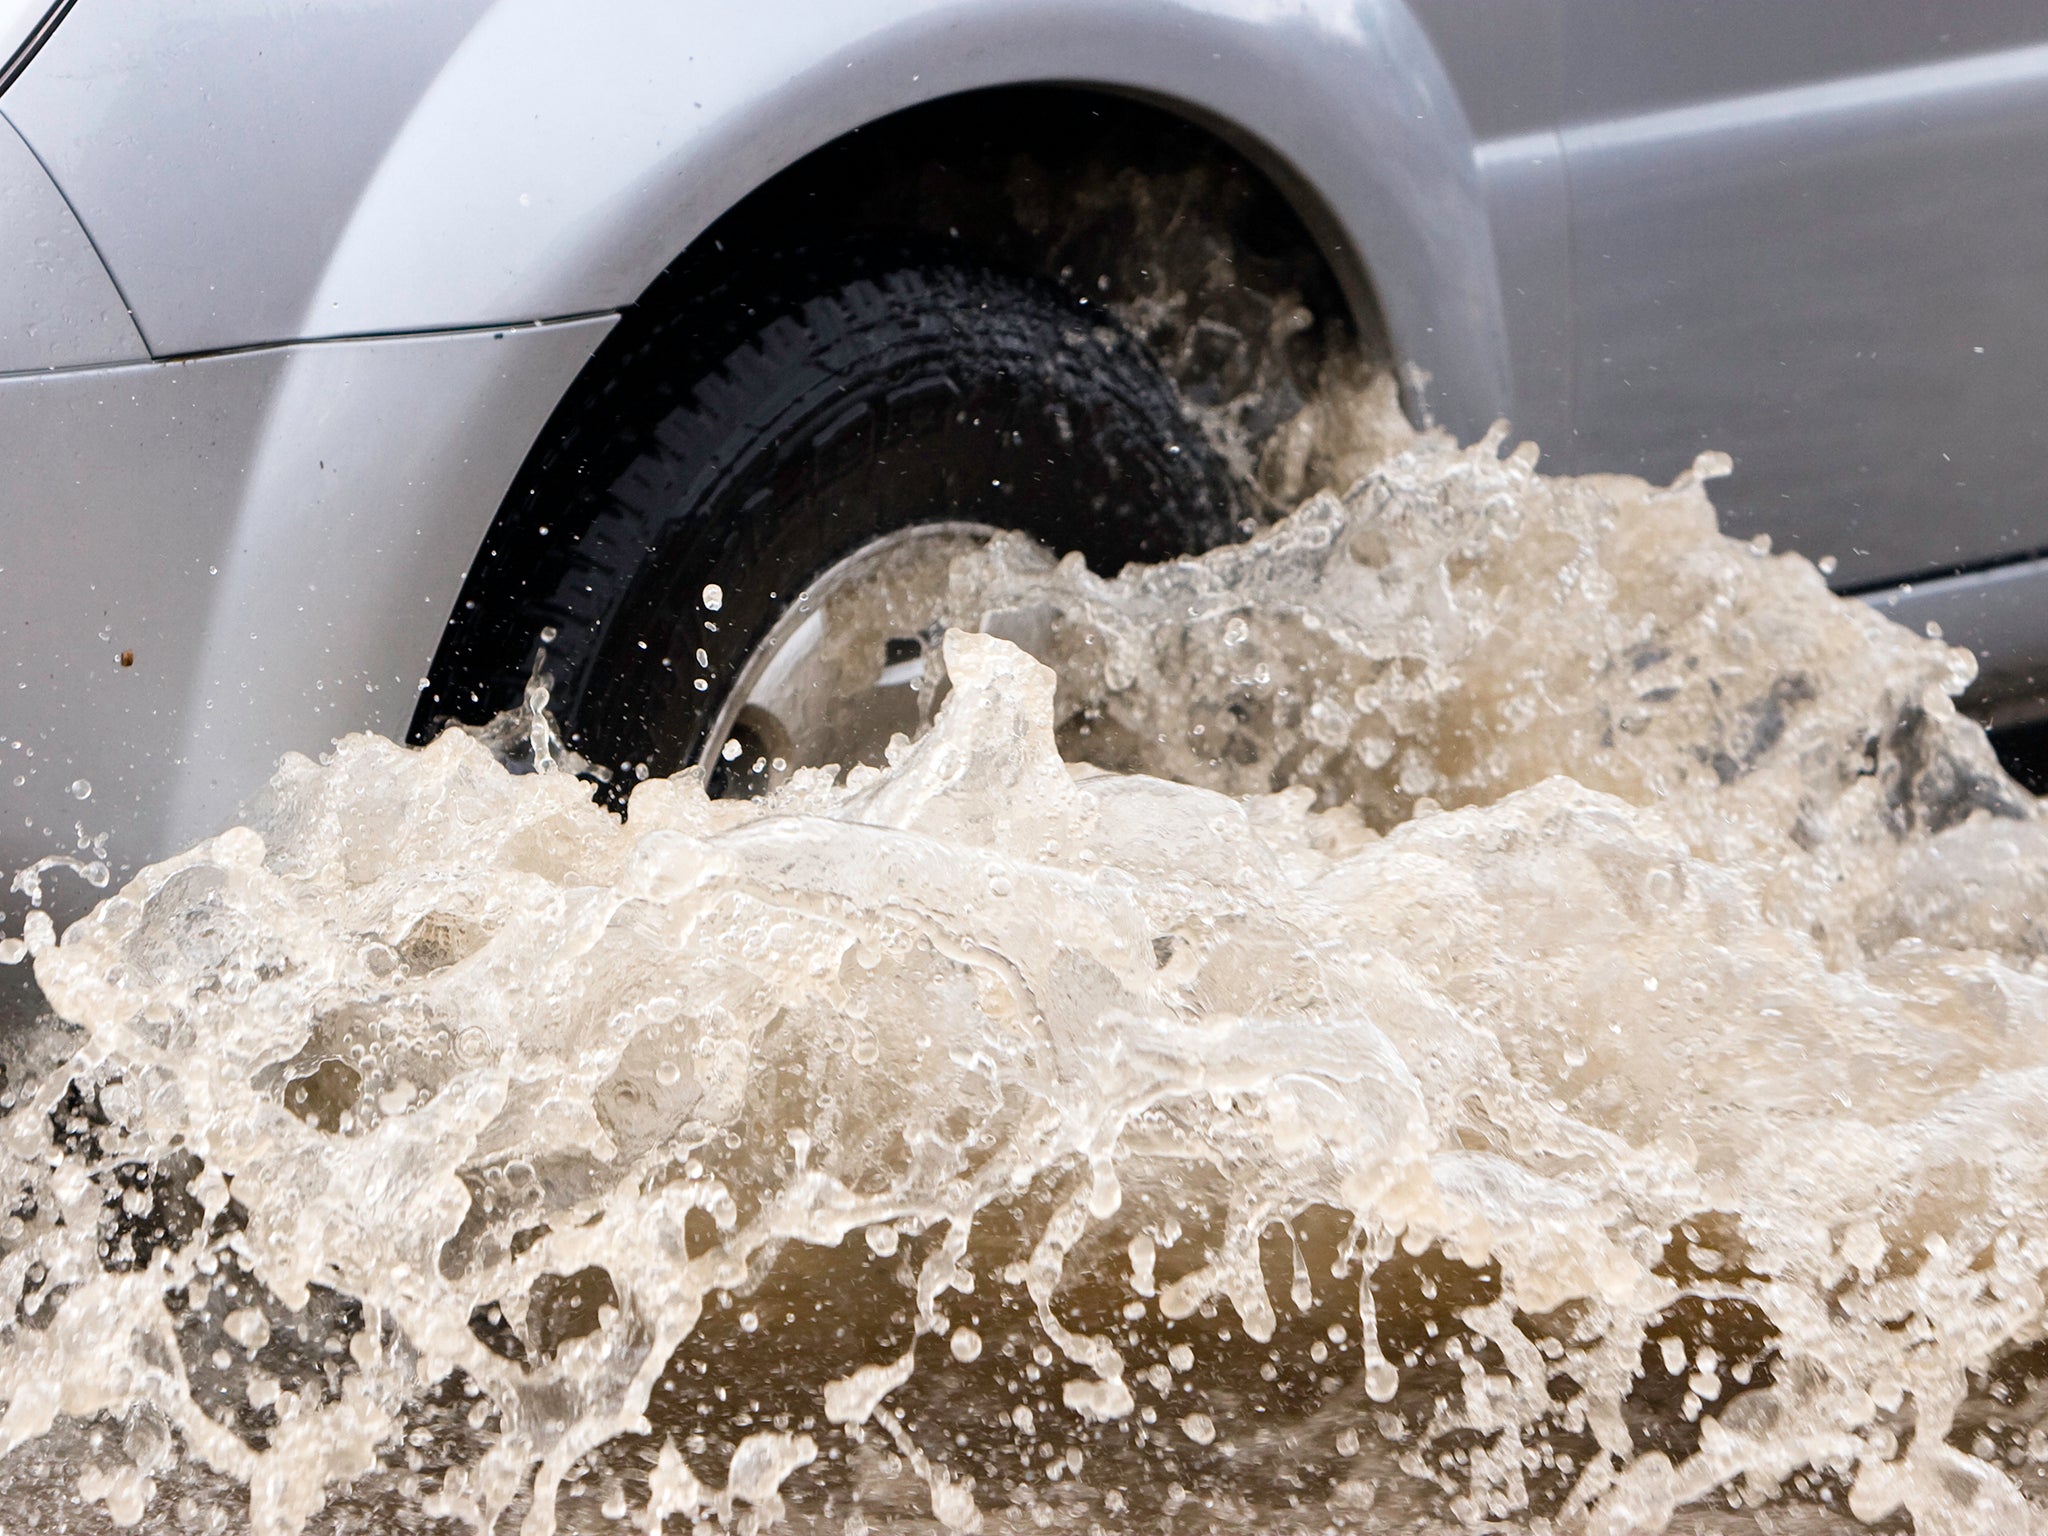 It is thought drivers splashed Hilda Moore by driving through puddles before she died